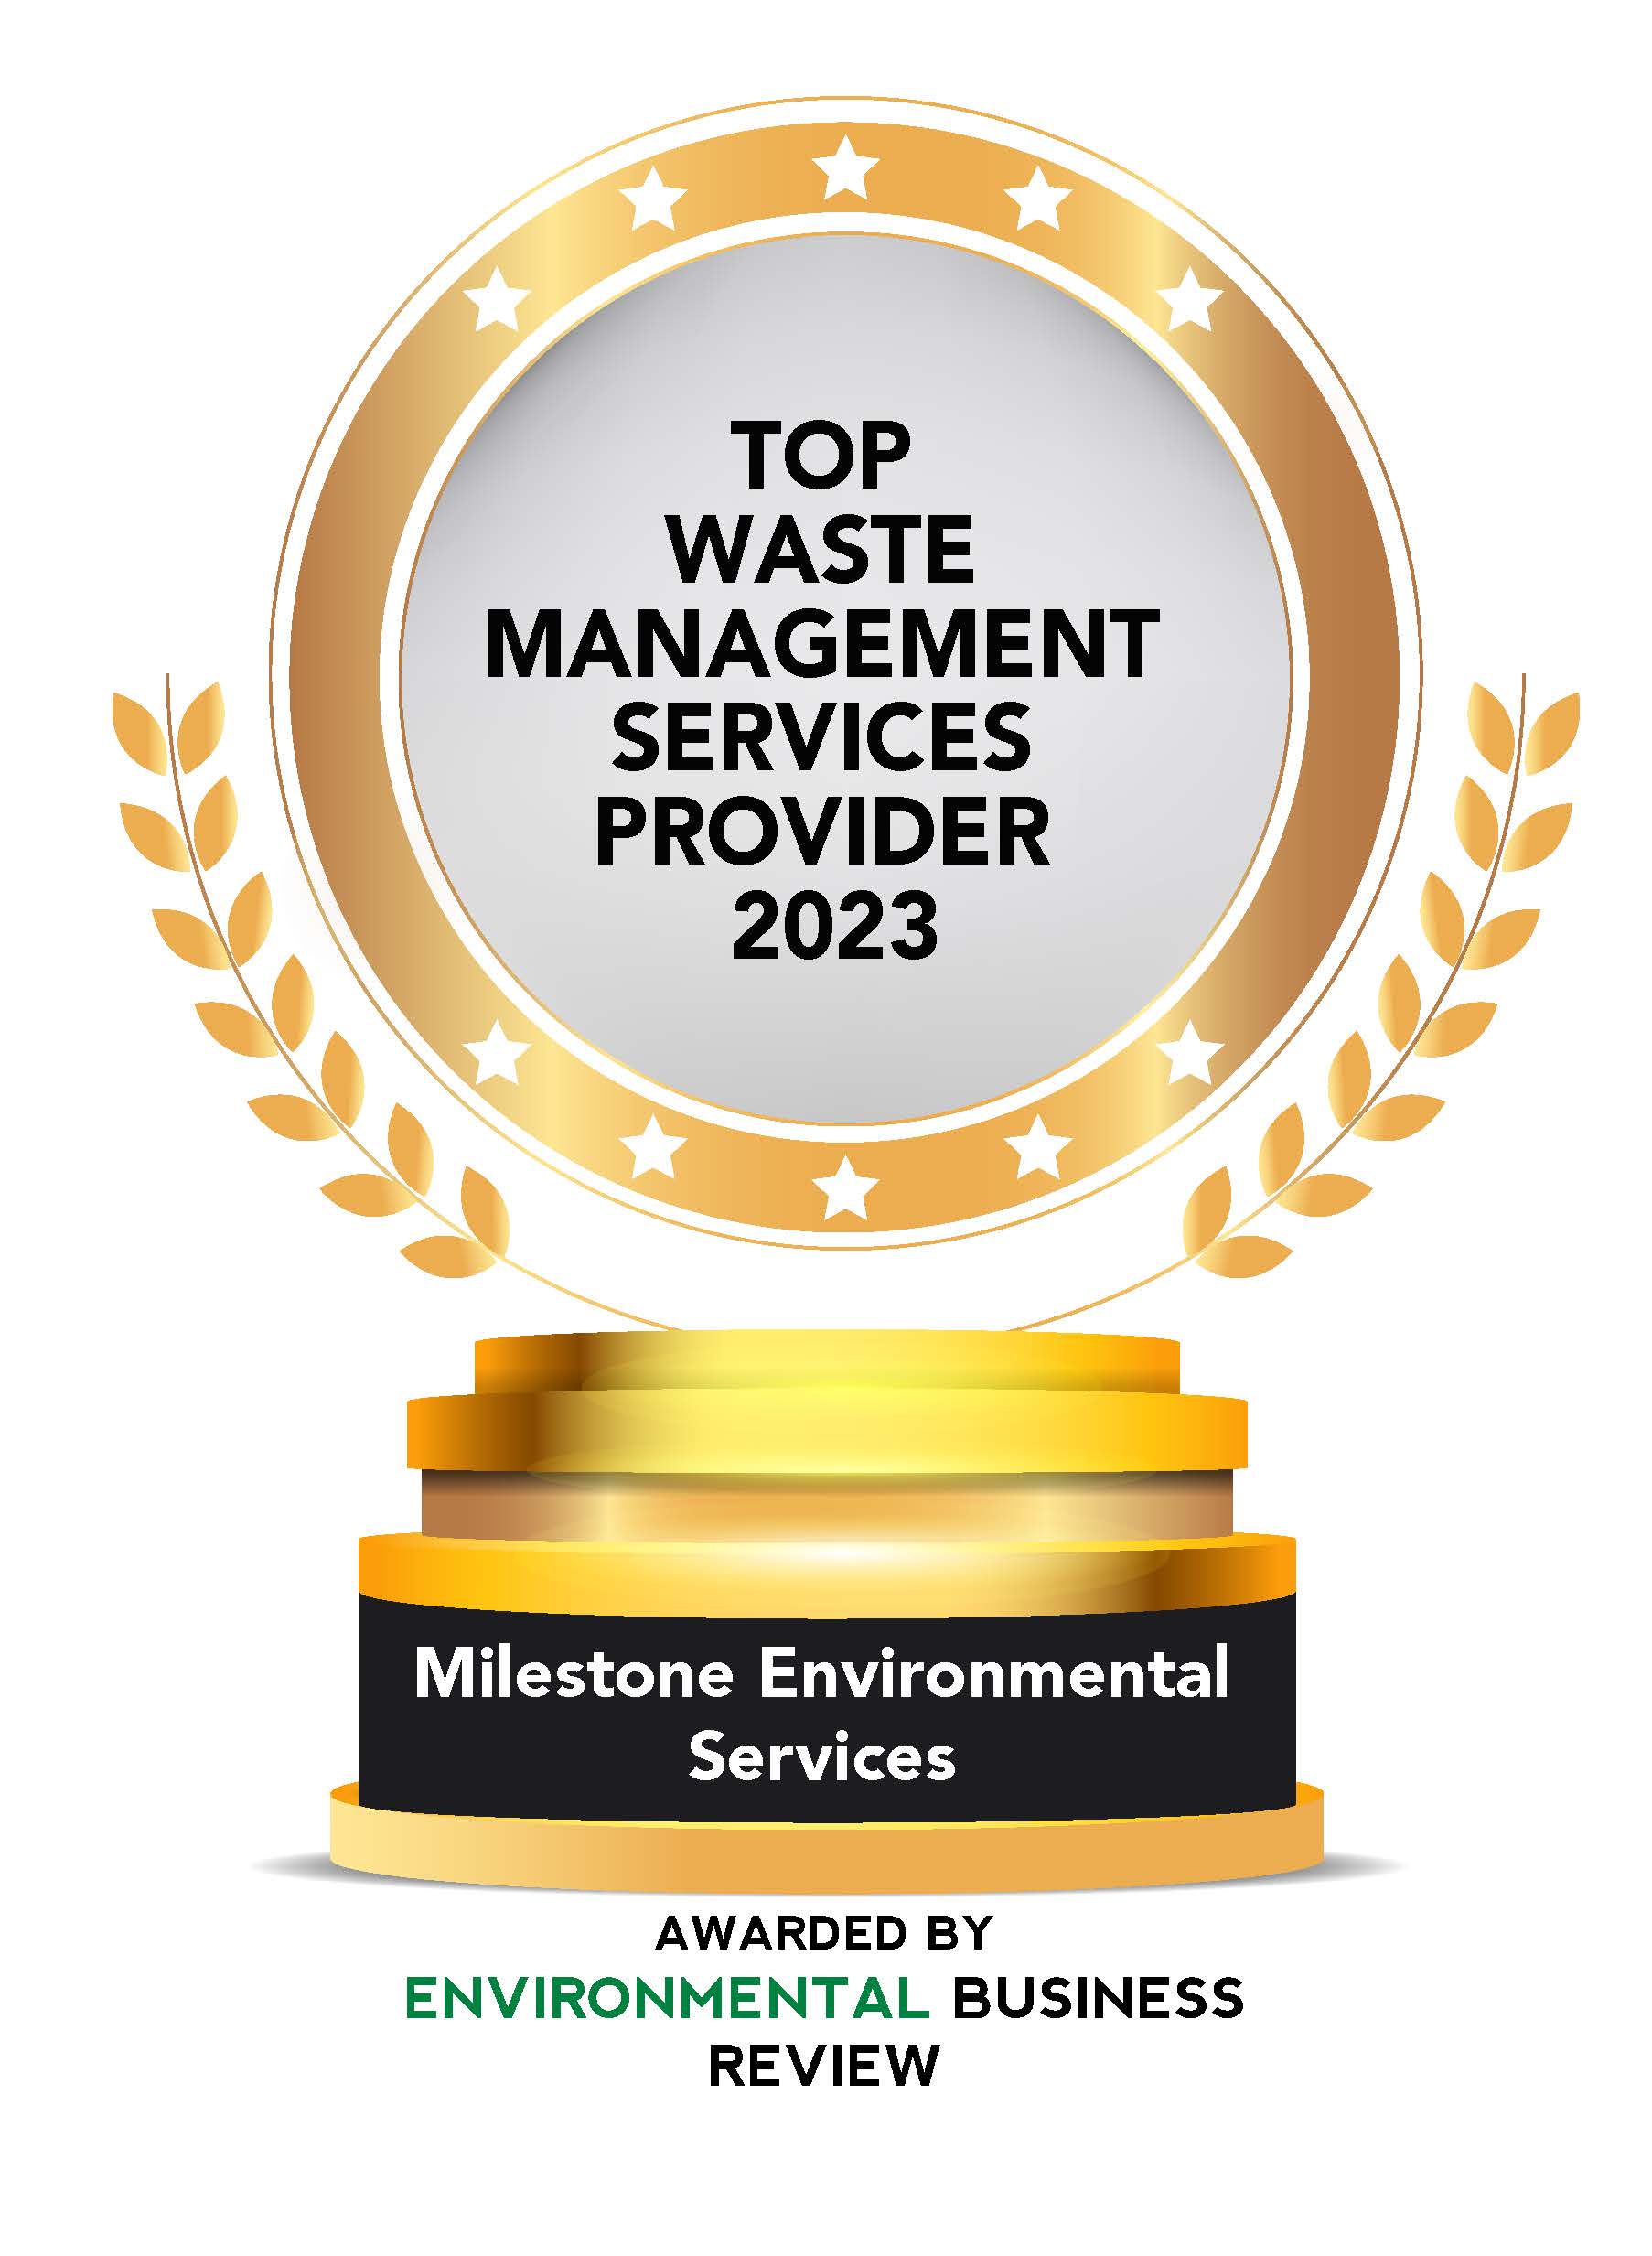 Top Waste Management Services Provider 2023